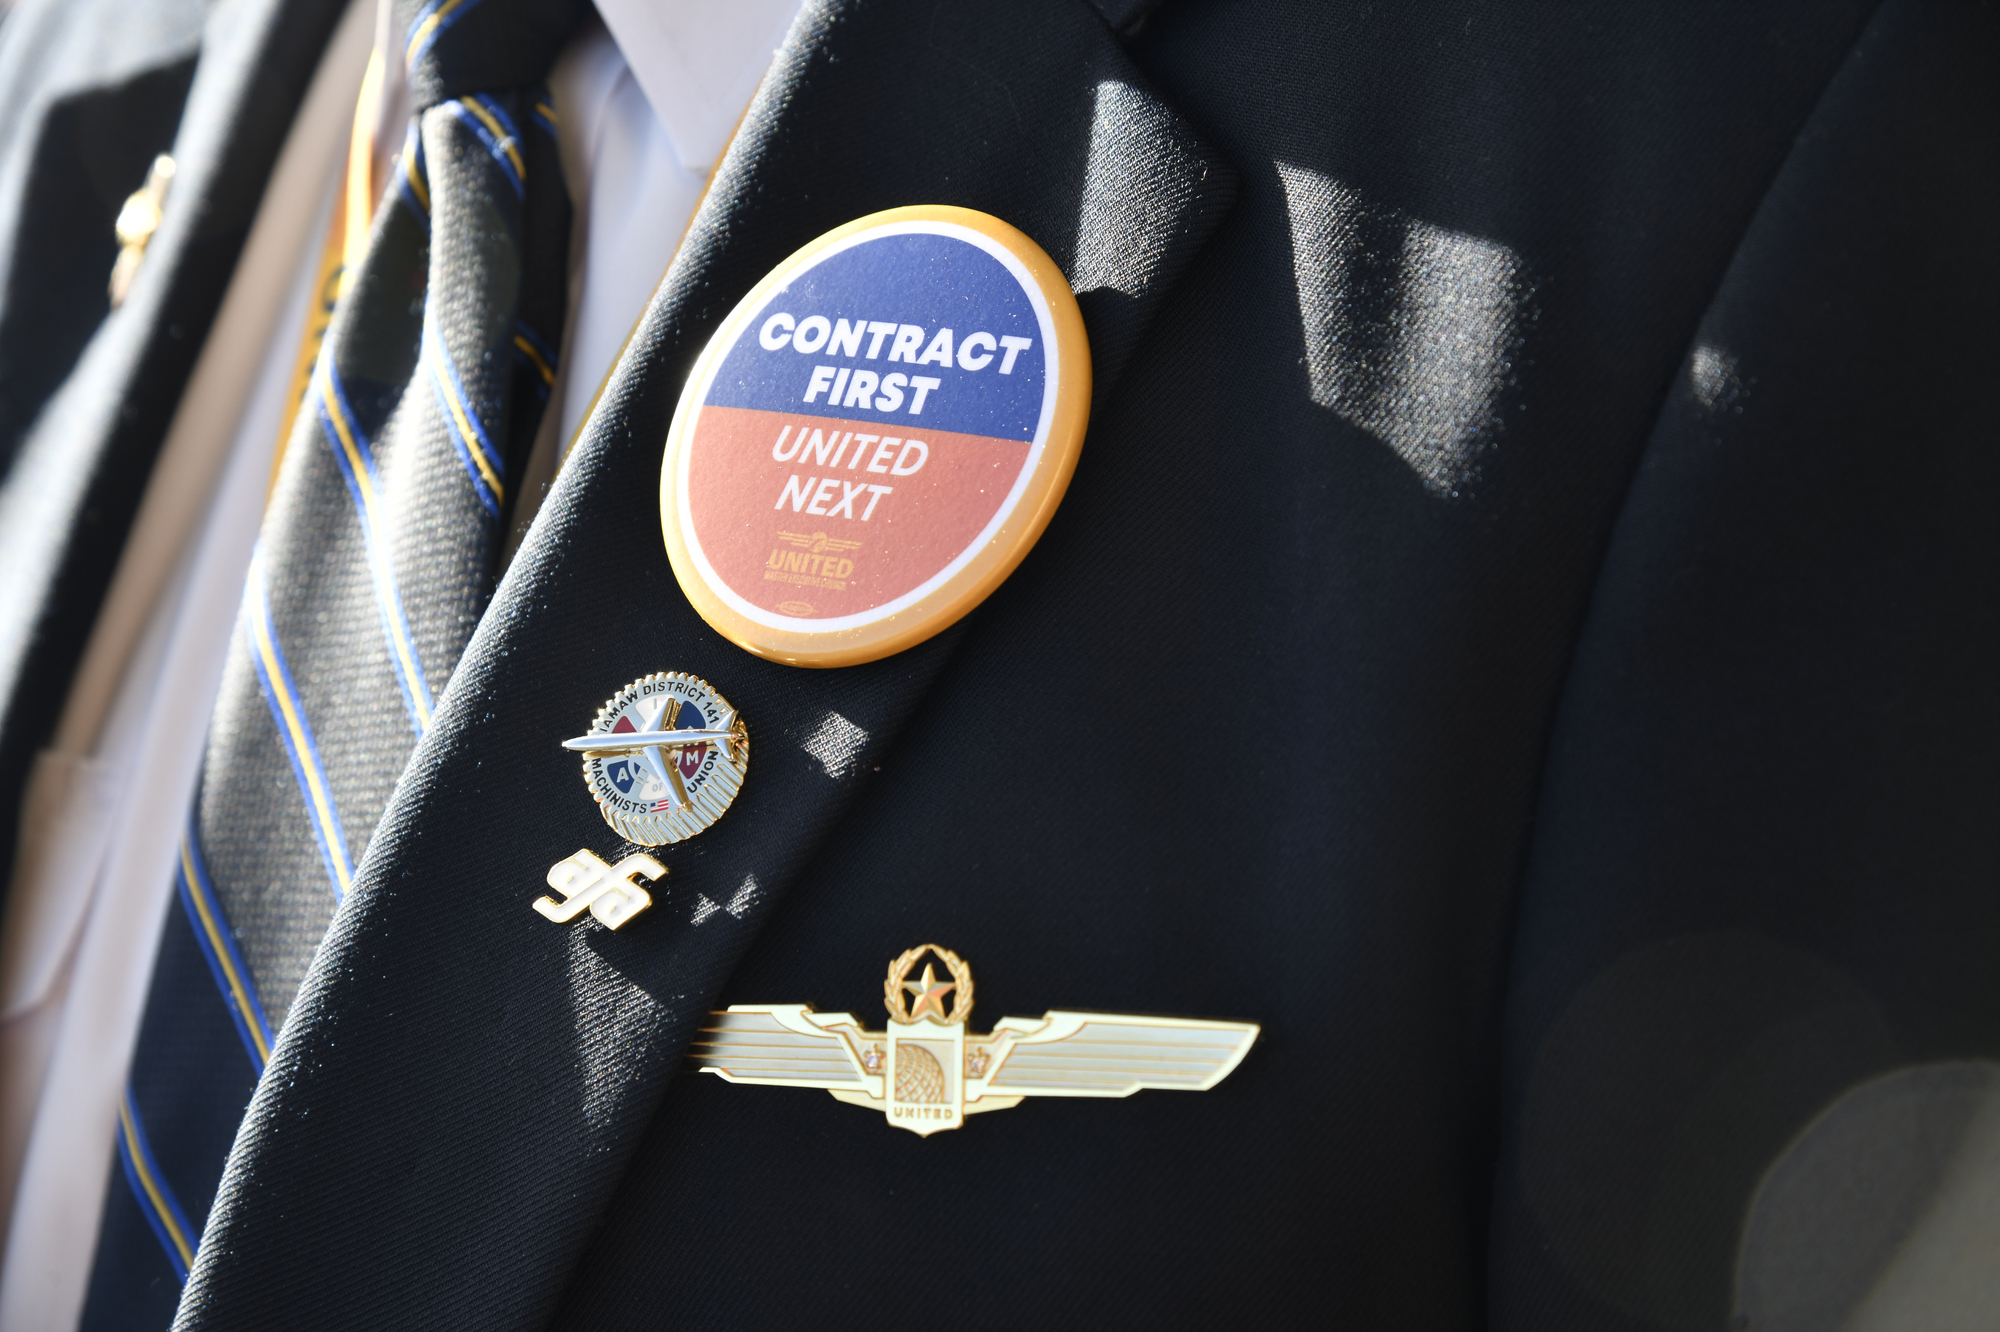 A pilots lapel with a Contract First United Next button 